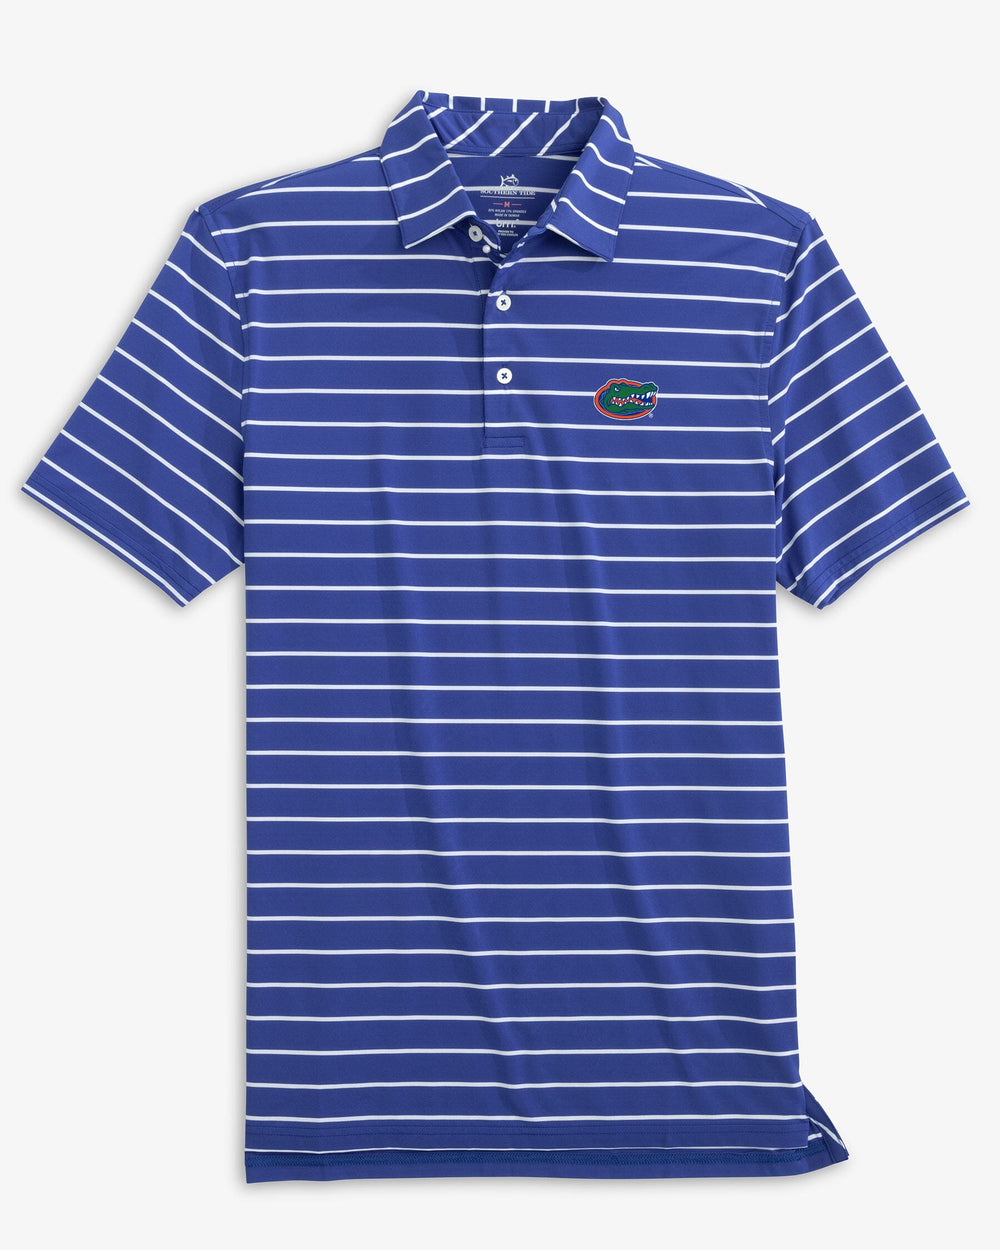 The front view of the Florida Gators Brreeze Desmond Stripe Performance Polo by Southern Tide - University Blue